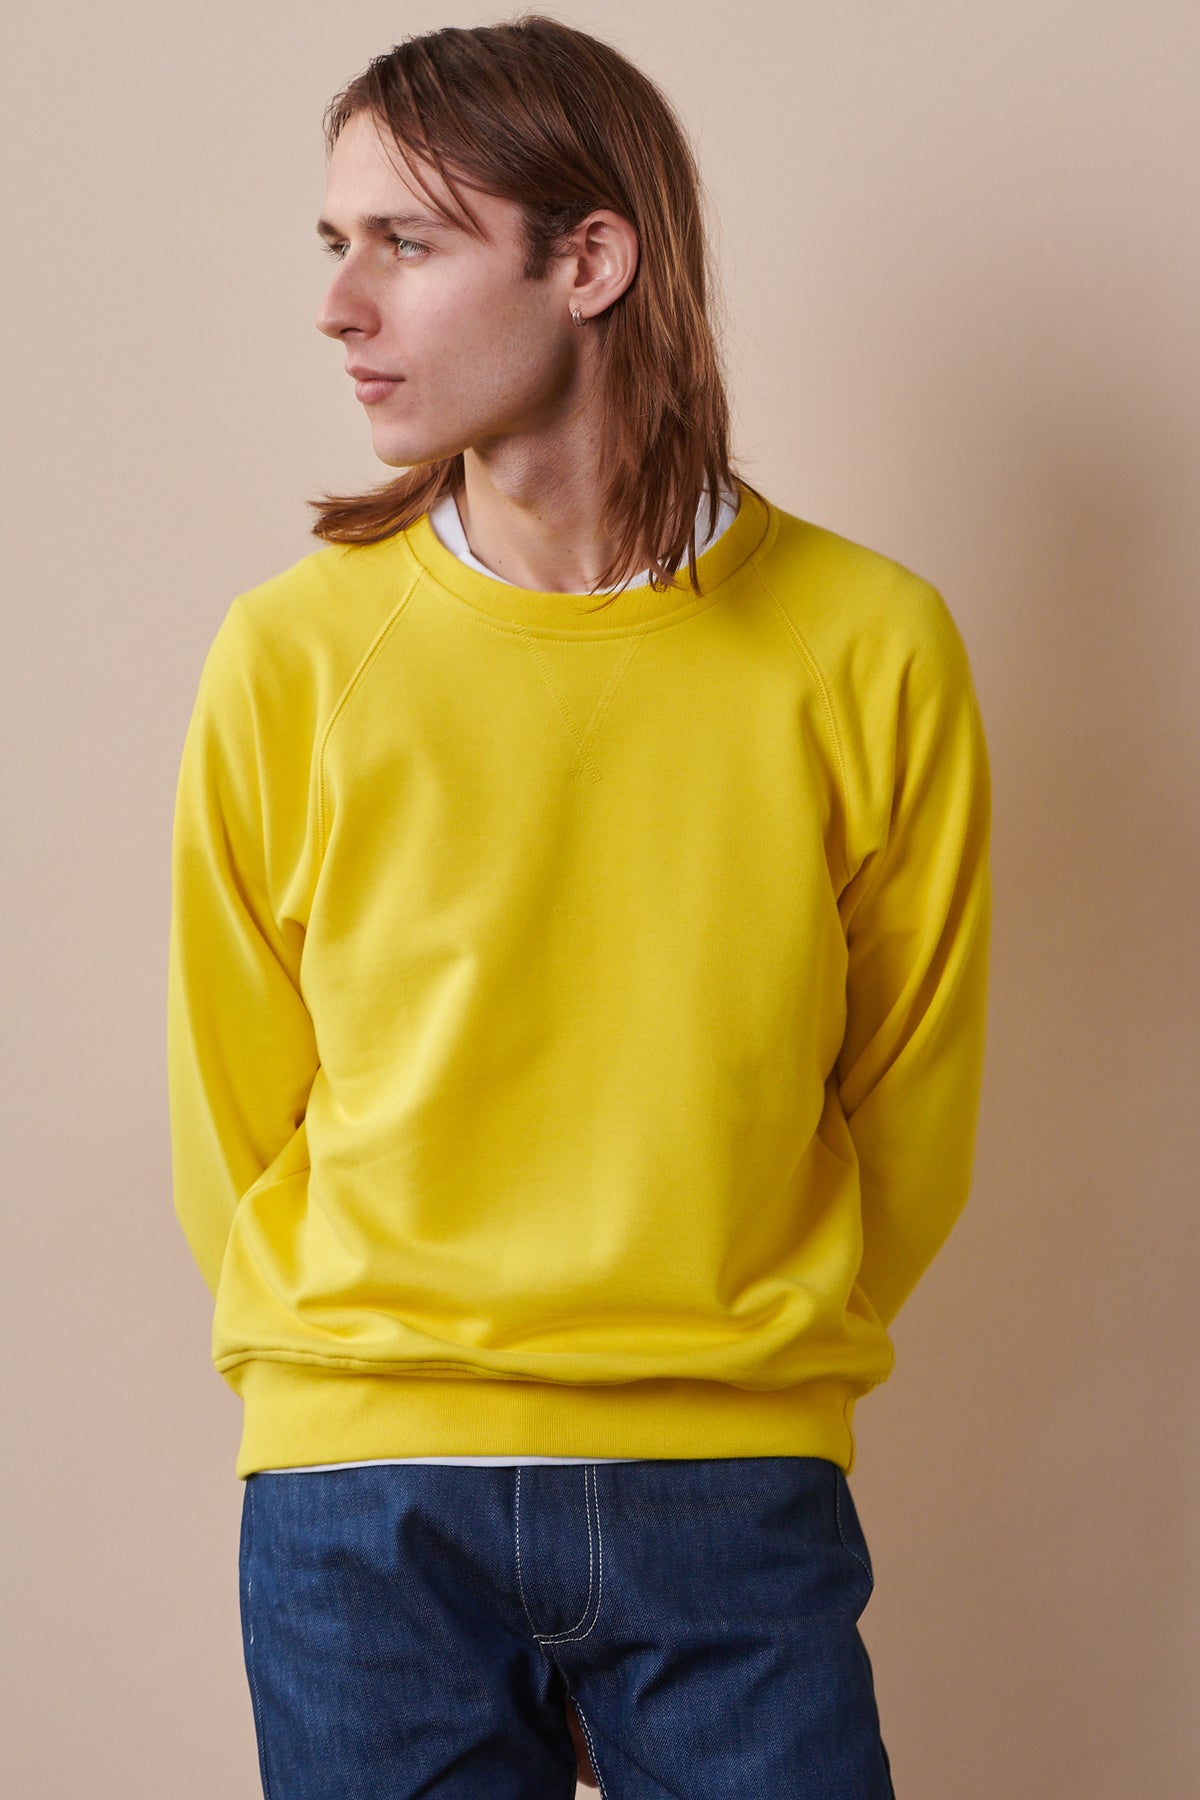 
            Male with shoulder length brown hair wearing raglan sweatshirt in canary yellow paired with blue jeans.